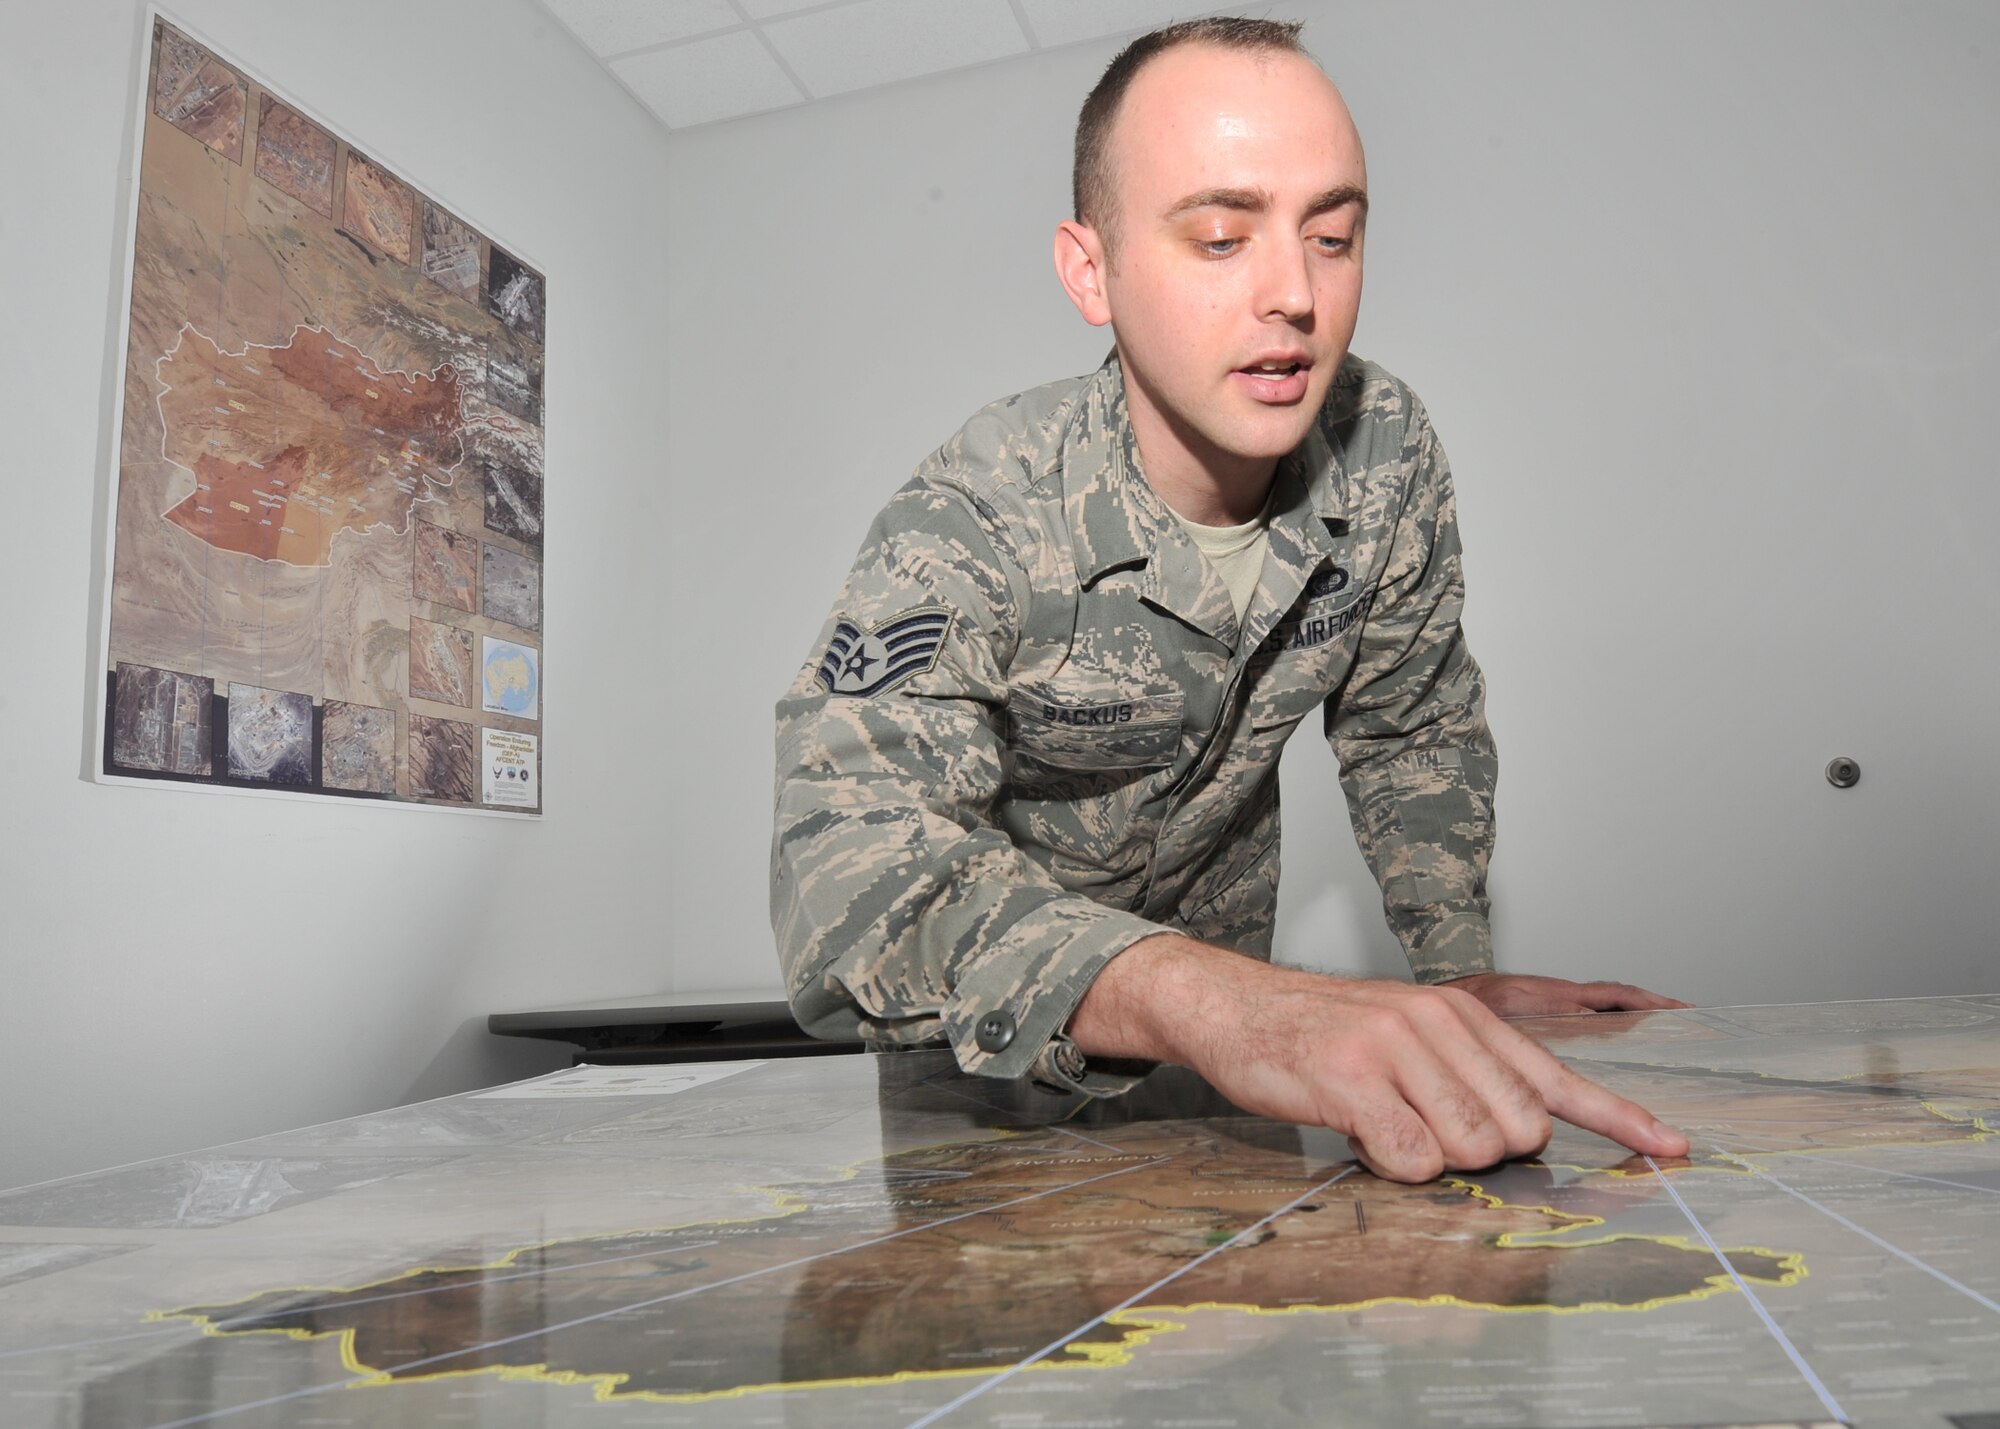 Staff Sgt. Patrick Backus, 772nd Enterprise Sourcing Squadron contracting specialist, identifies locations on a map where he provides support services at the Air Force Civil Engineer Center, June 23, 2016. As a contract specialist, Backus’ role is to purchase contractor support and monitor contractor performance. Backus currently maintains contract oversight for task orders in Afghanistan as well as other areas of responsibility. These sites otherwise known as Areas of Responsibility are deployed locations that require support from outside contract organizations. (U.S. Air Force photo by Senior Airman Ty-Rico Lea/Released)